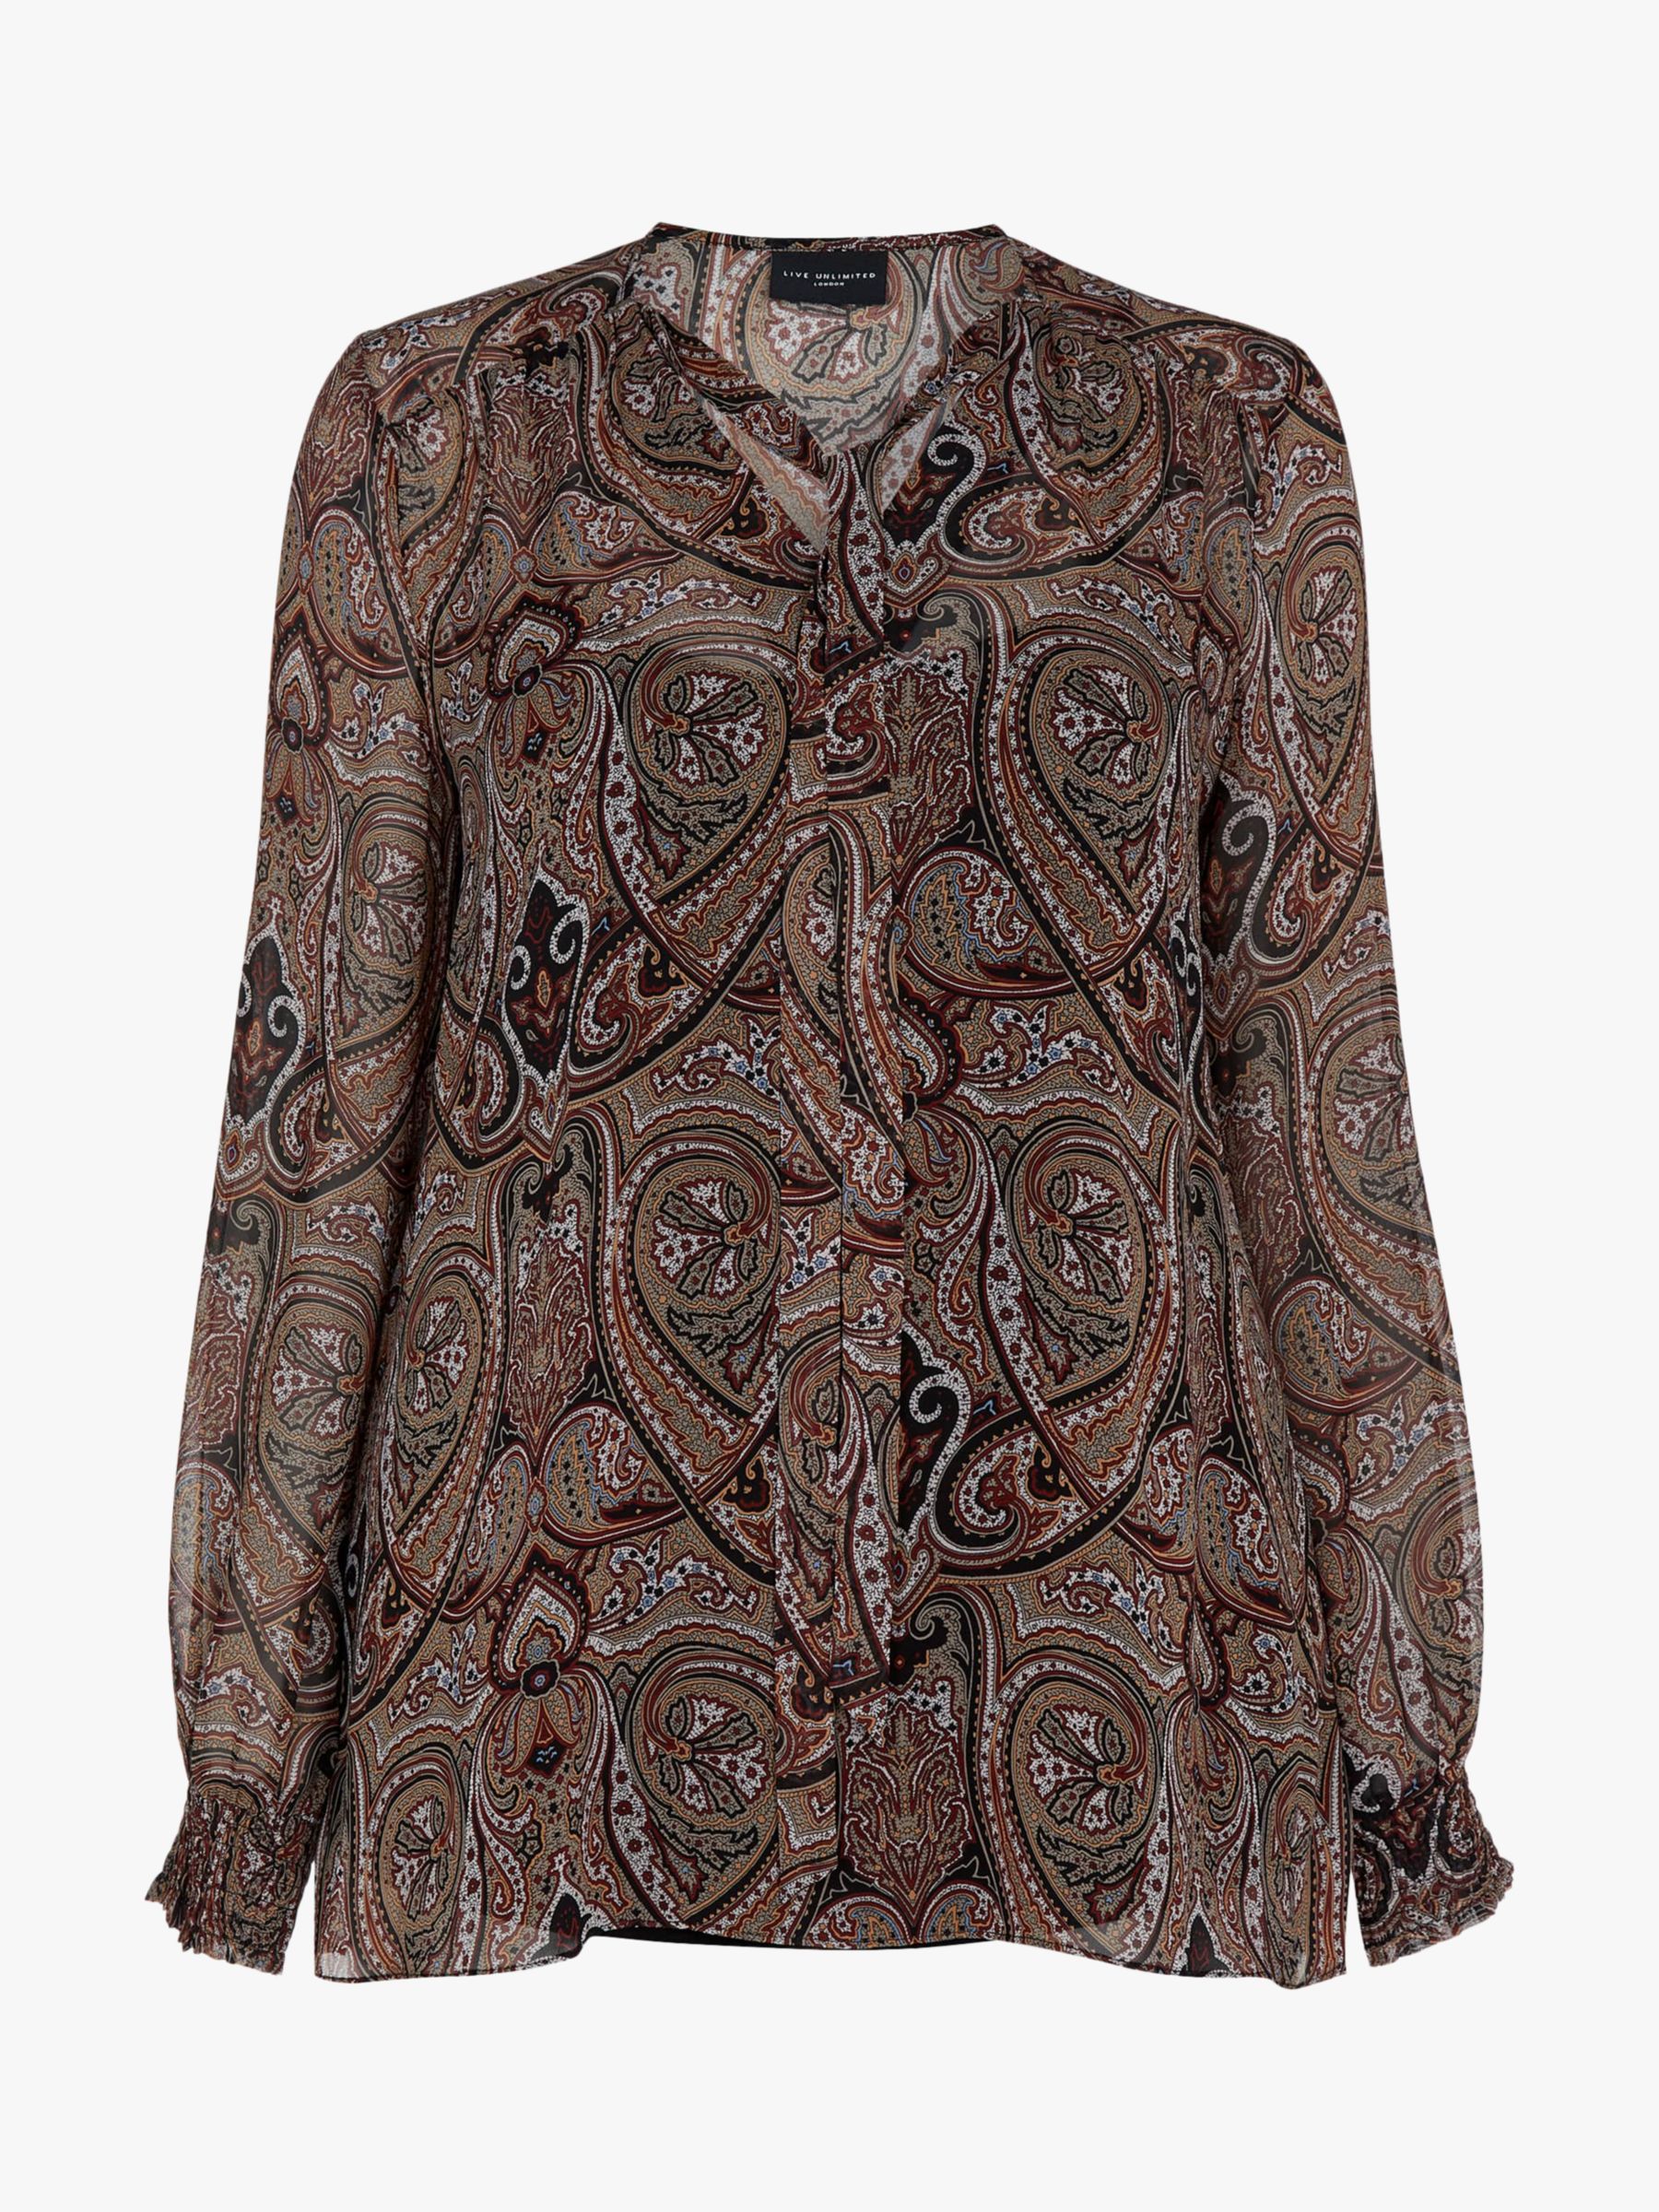 Live Unlimited Paisley Blouse, Brown/Multi at John Lewis & Partners